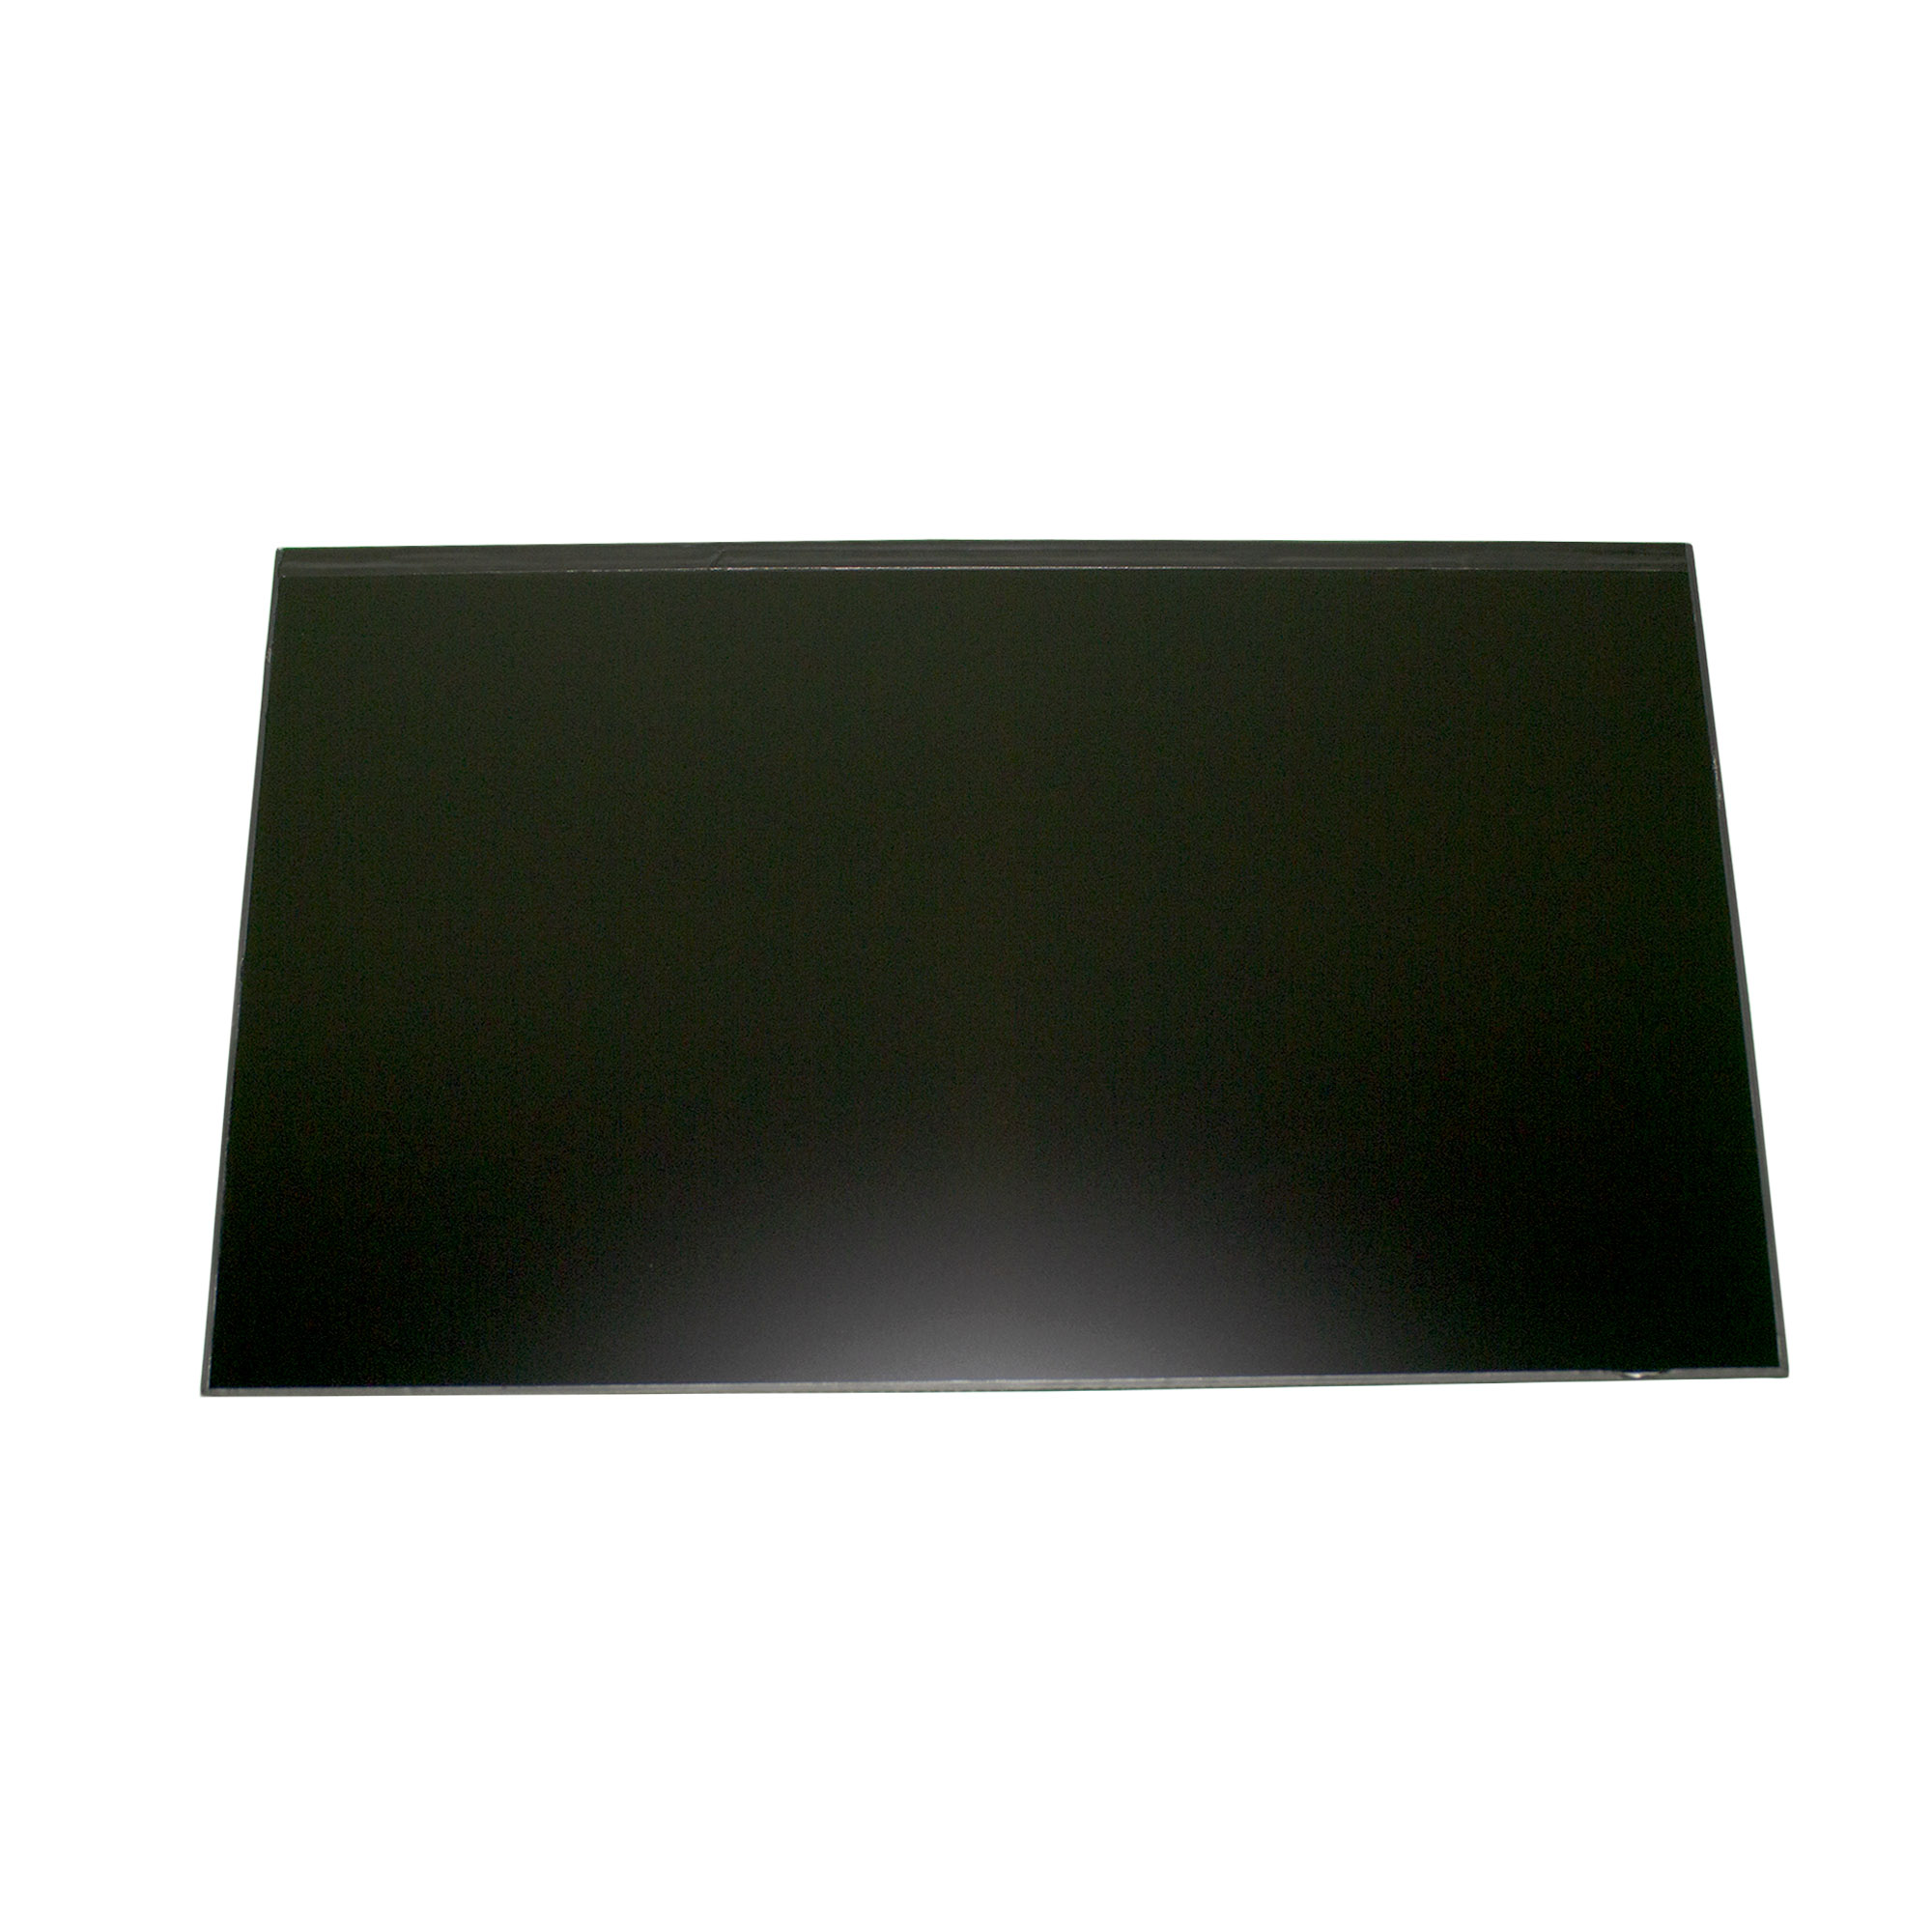 14.0" 30PIN LCD FHD 1080P BEND CONNECTOR